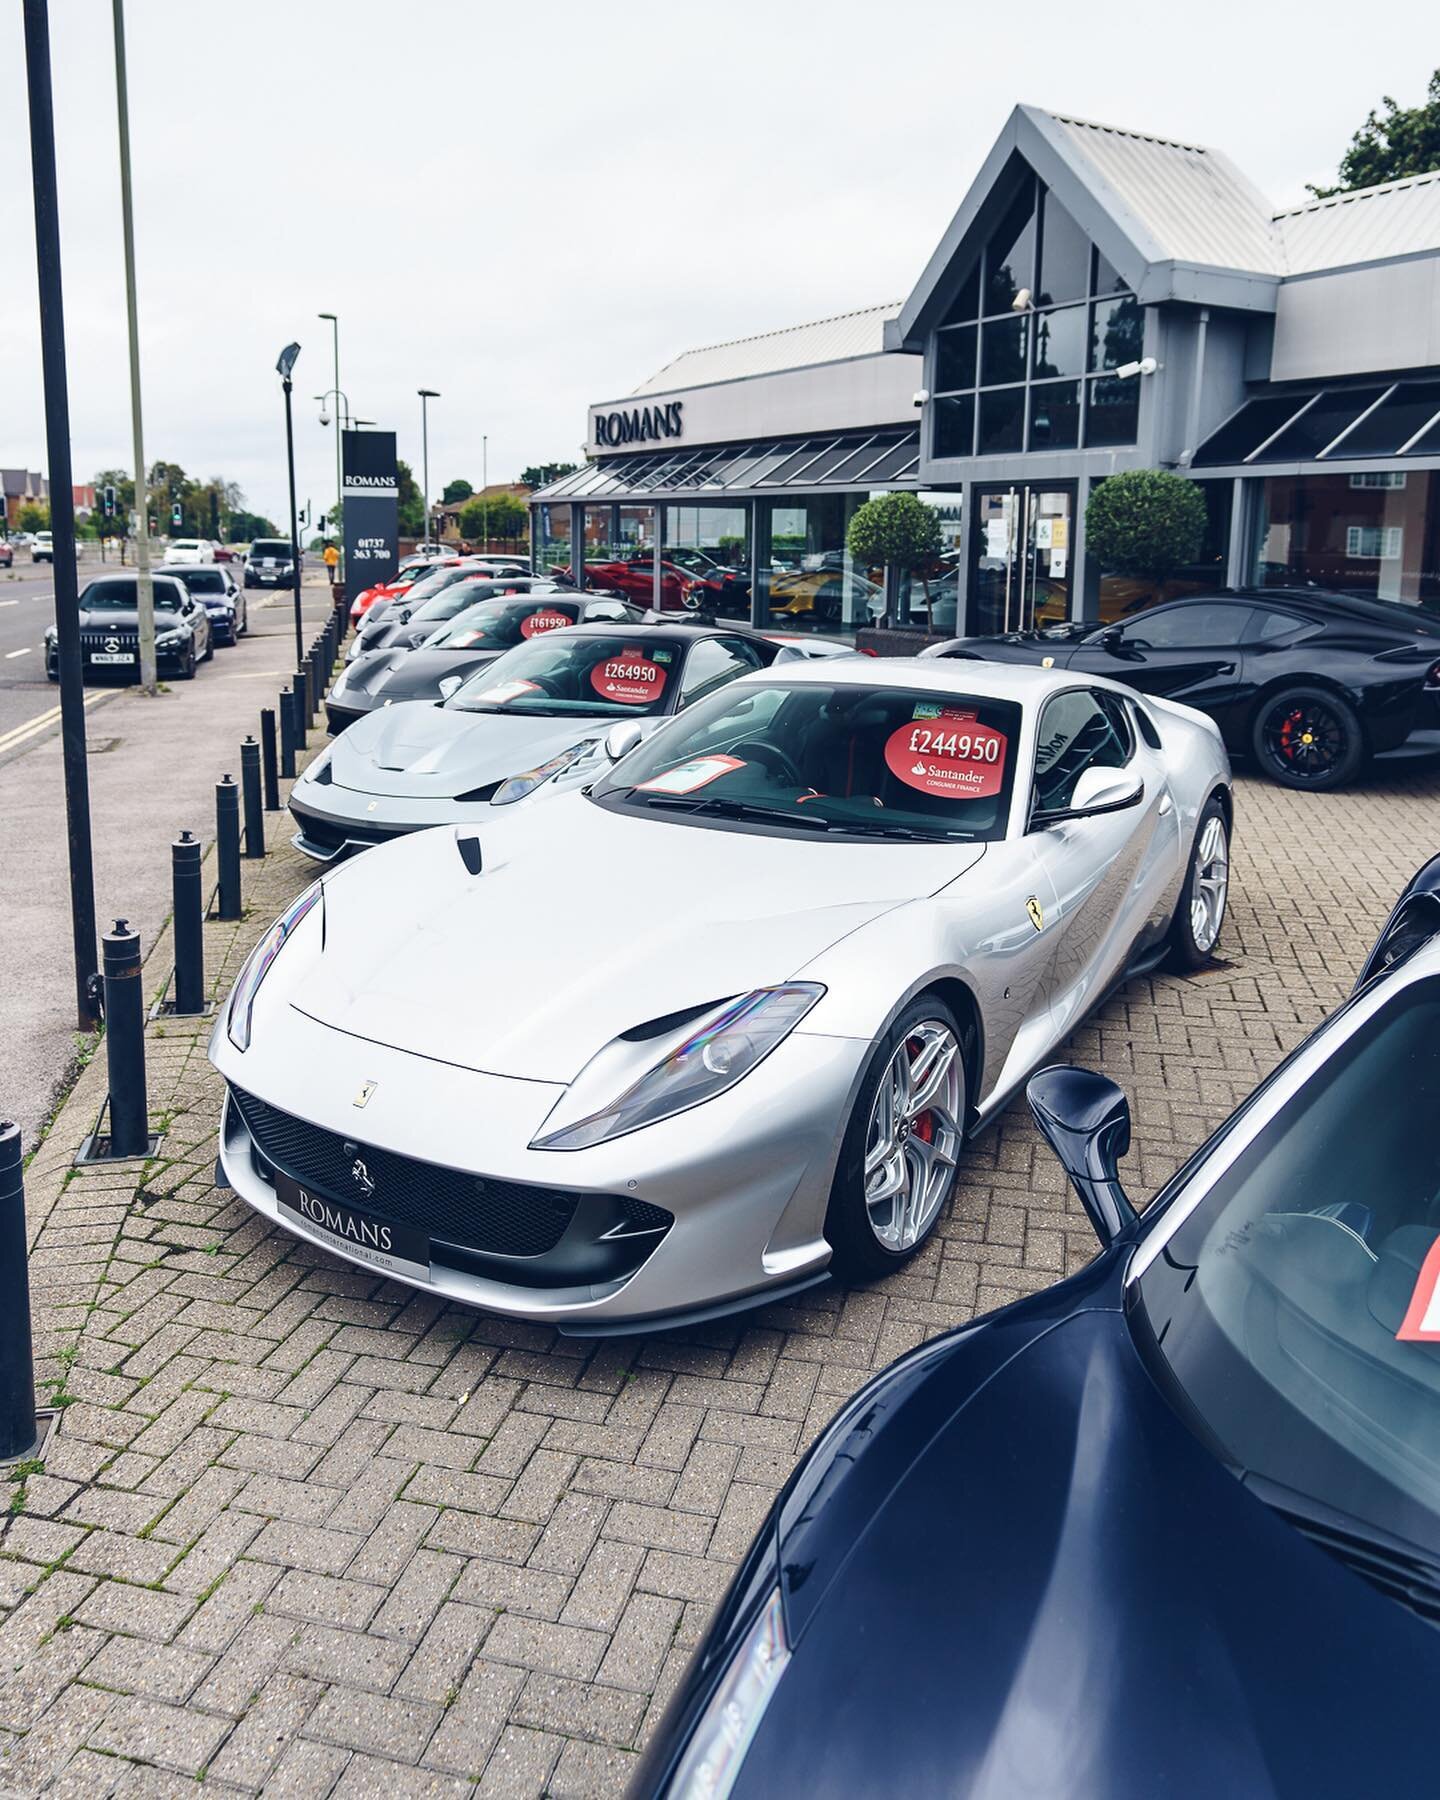 The podcast this week (link in bio) is Tom Jaconelli (@jackanello) from @Romansinternational, a great chat about the supercar market, buying and selling cars and what it's like to run a place with stock like this! I've got a game for you guys if you'